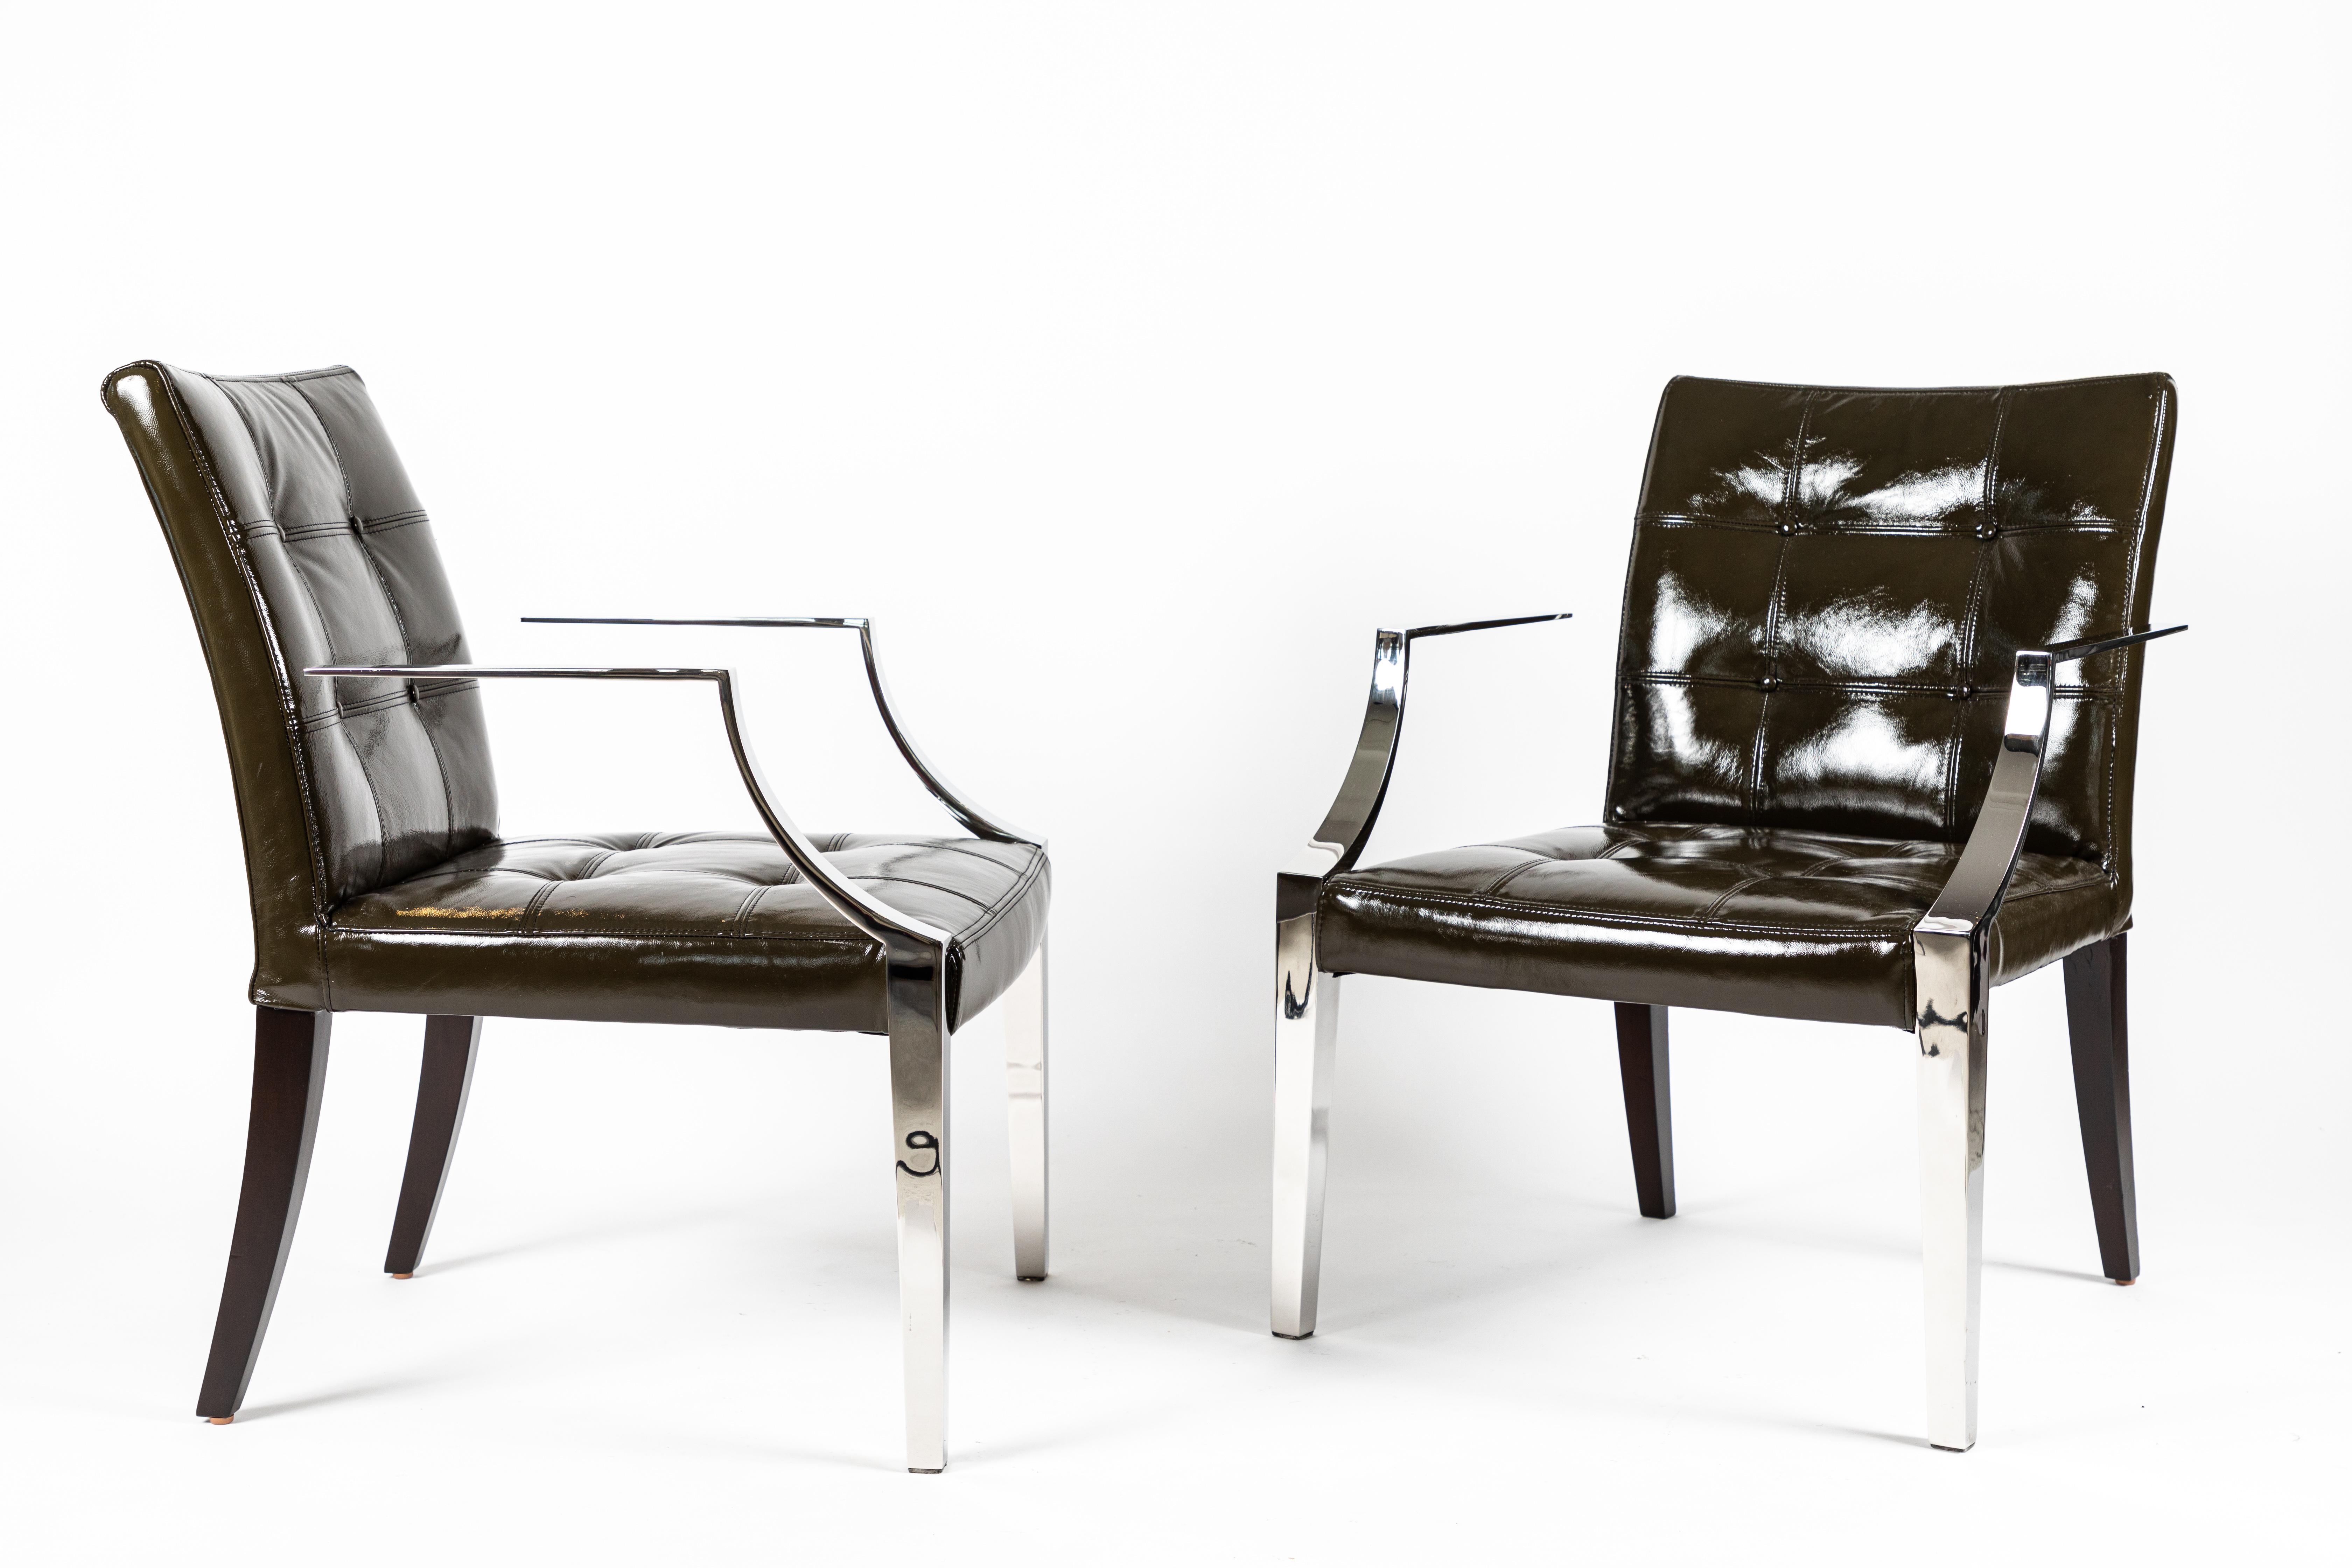 A chic pair of Monseigneur chairs by 20th century Master Philippe Starck. Acquired from the SLS Hotel in Beverly Hills after an extensive remodel. Newly upholstered in a dark olive green patent leather these chairs have also had the Stainless Steel